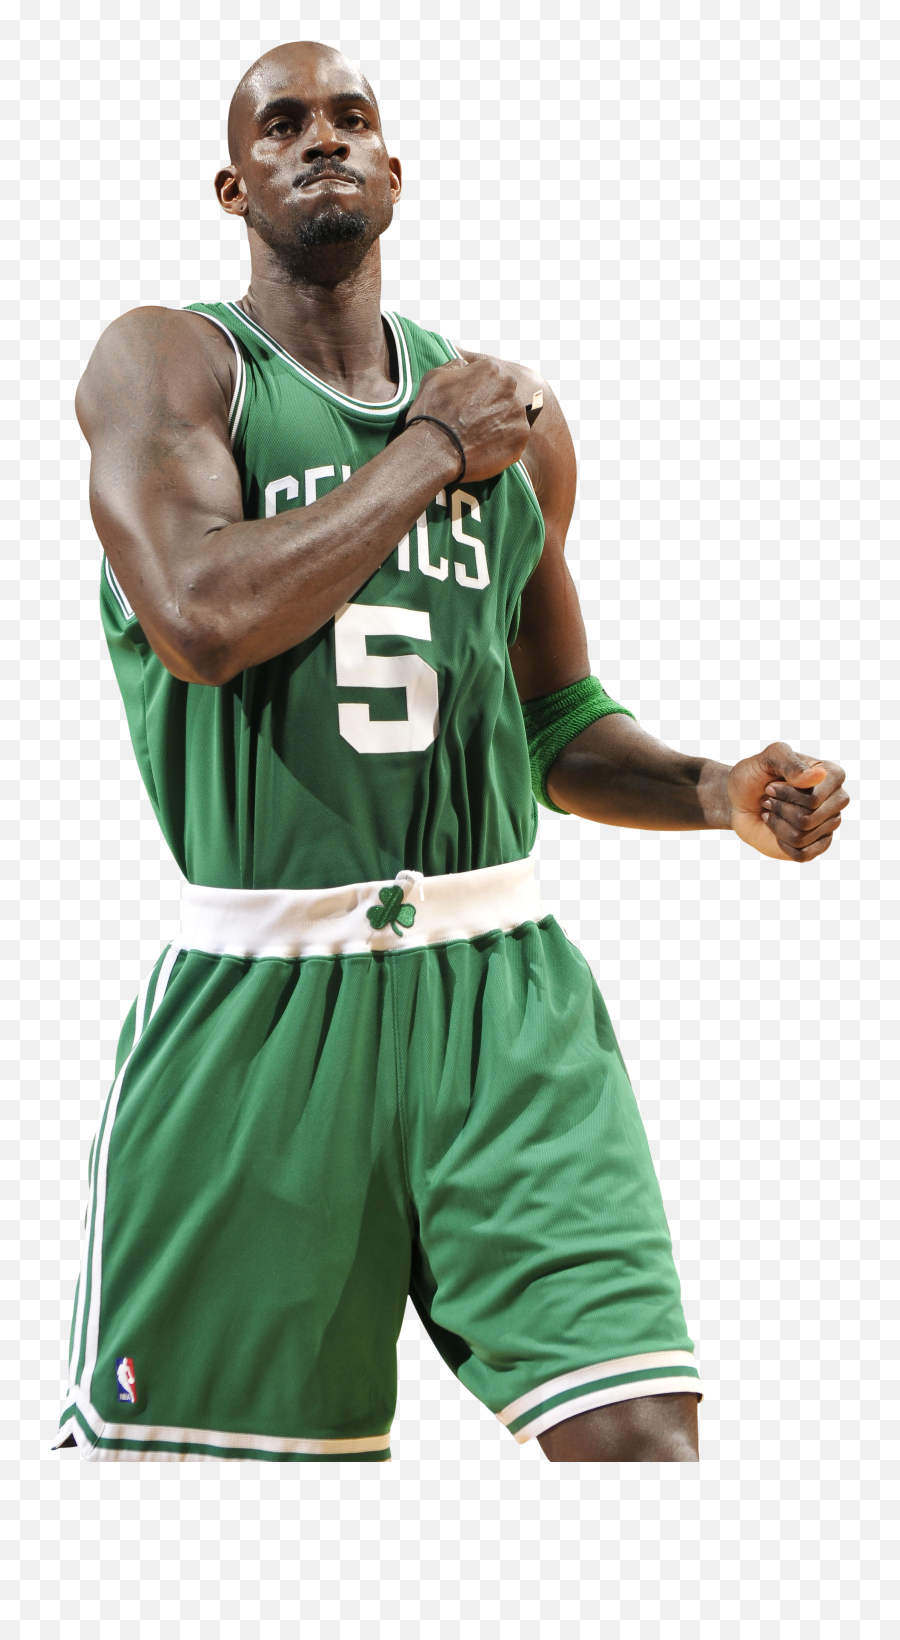 Russell Westbrook Png Viewing Gallery - Boston Celtics Jersey,Westbrook Png